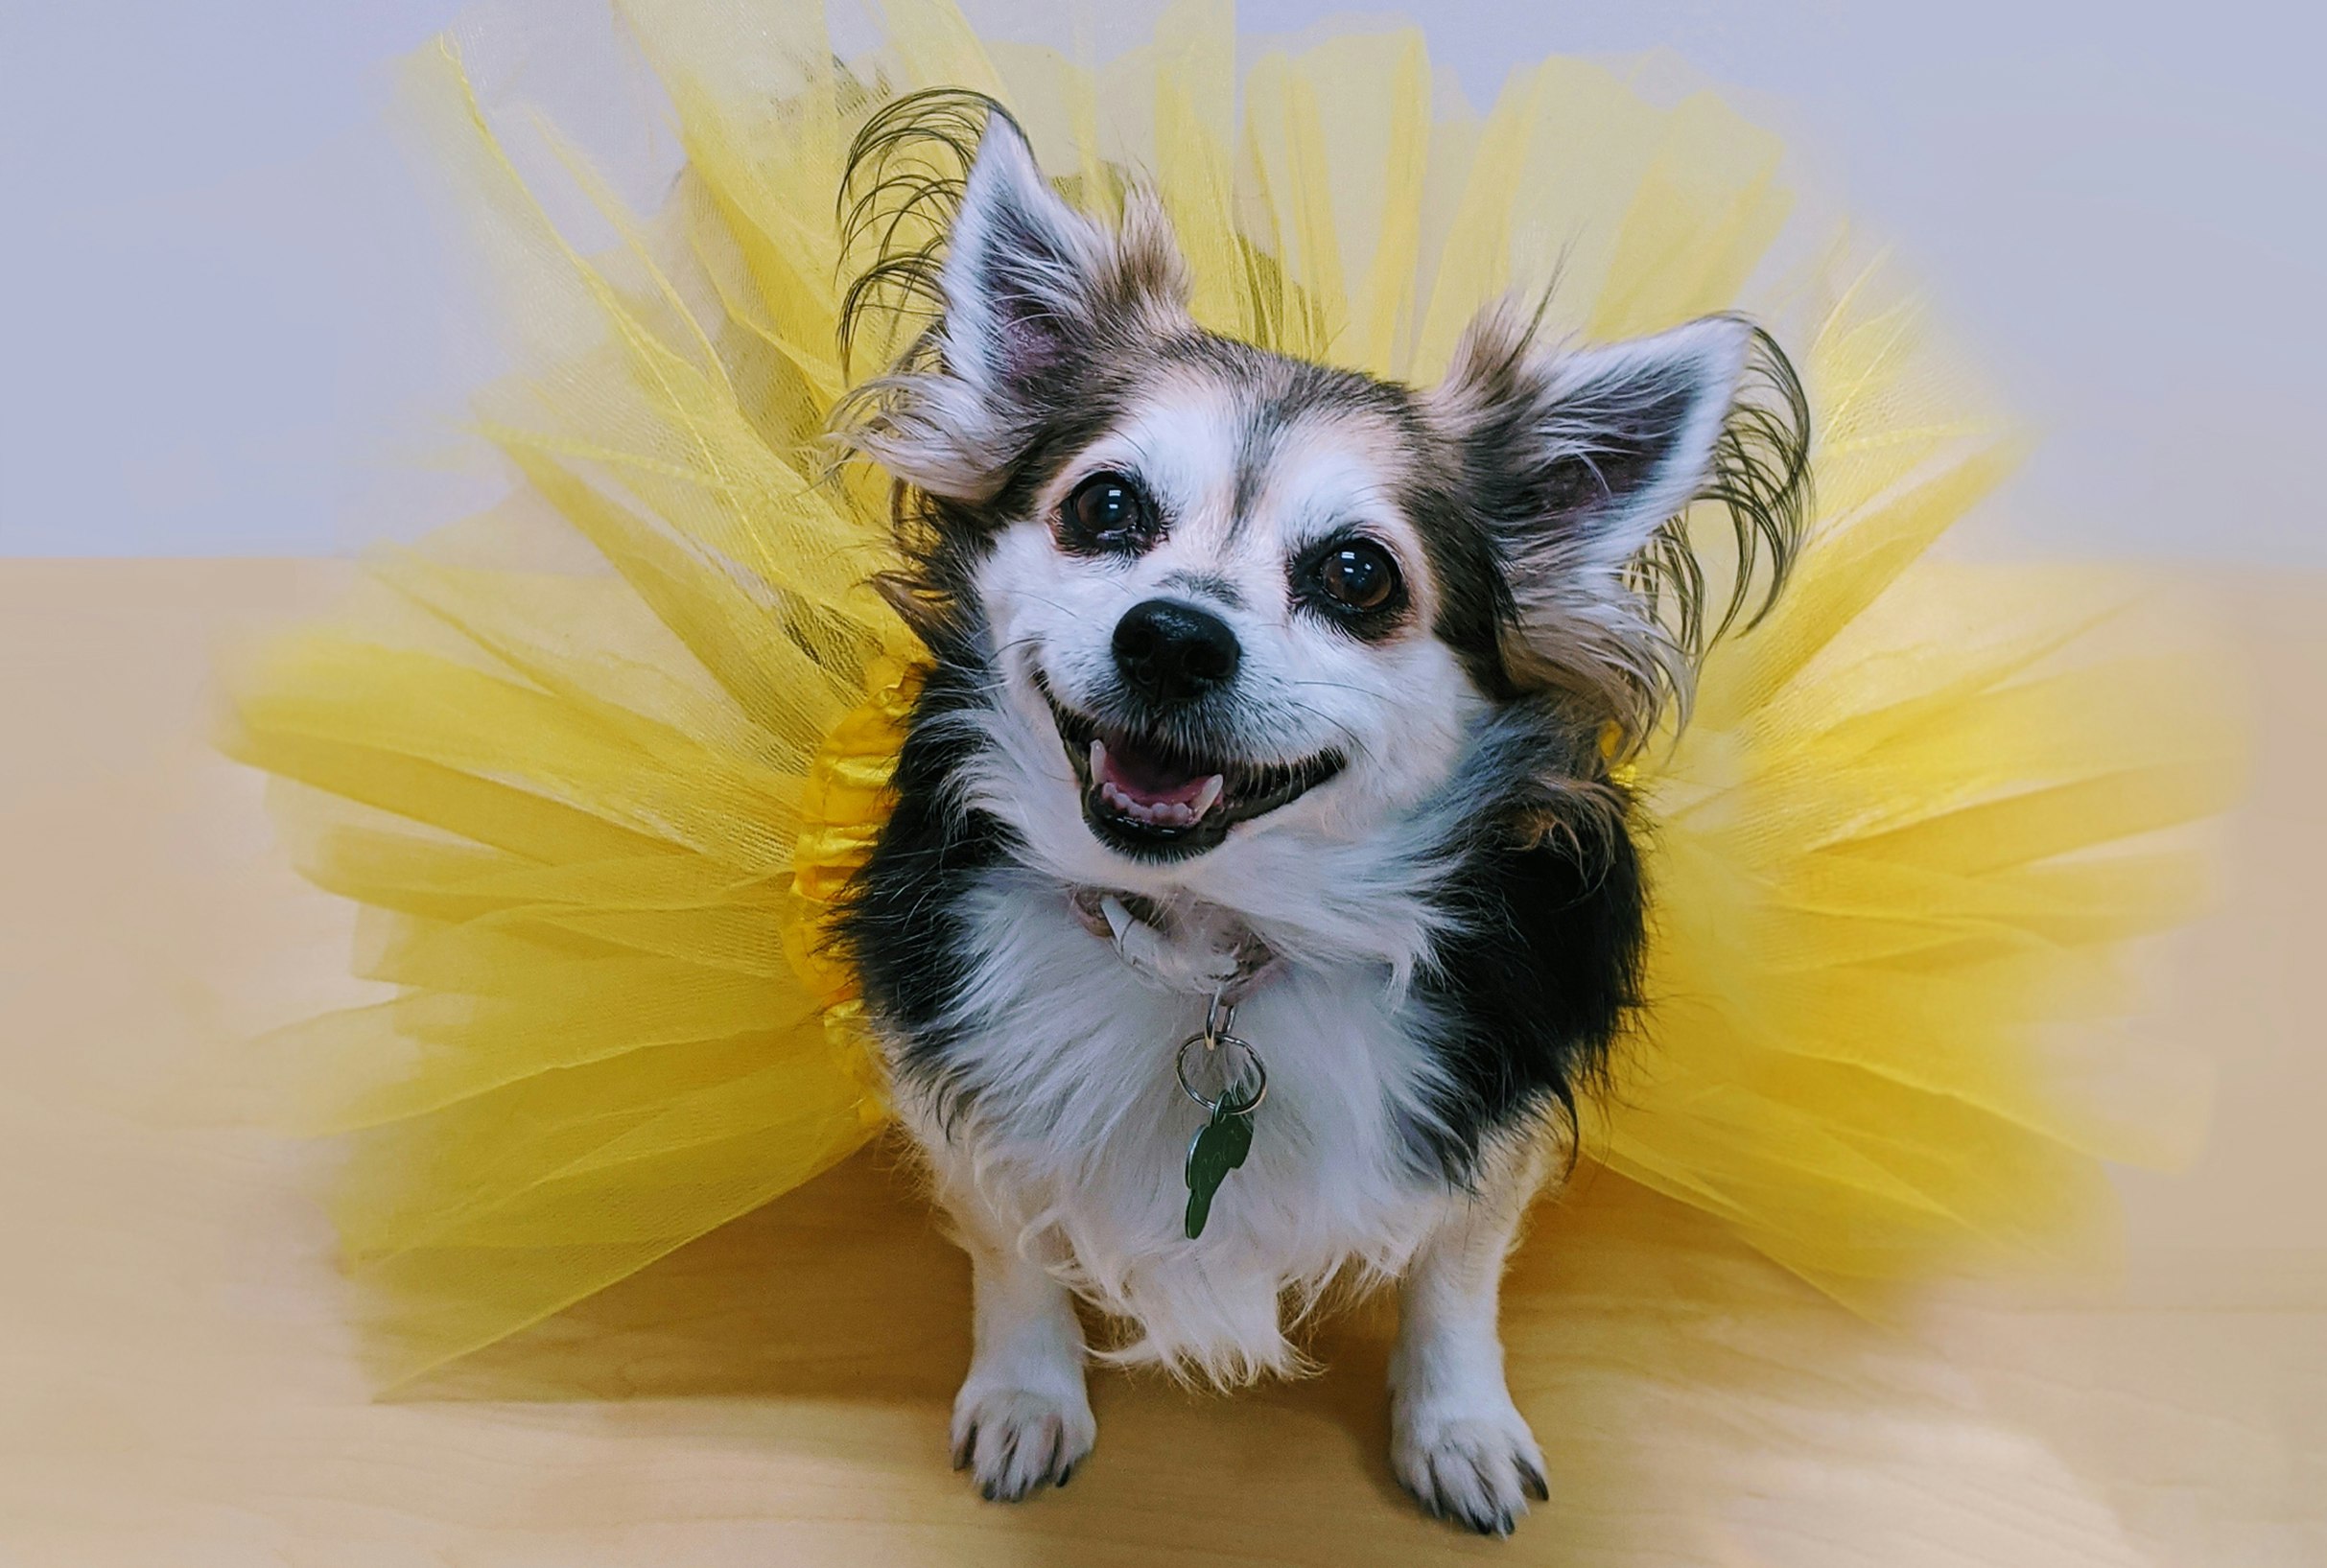 A small dog is wearing a yellow tutu and looking at the camera.